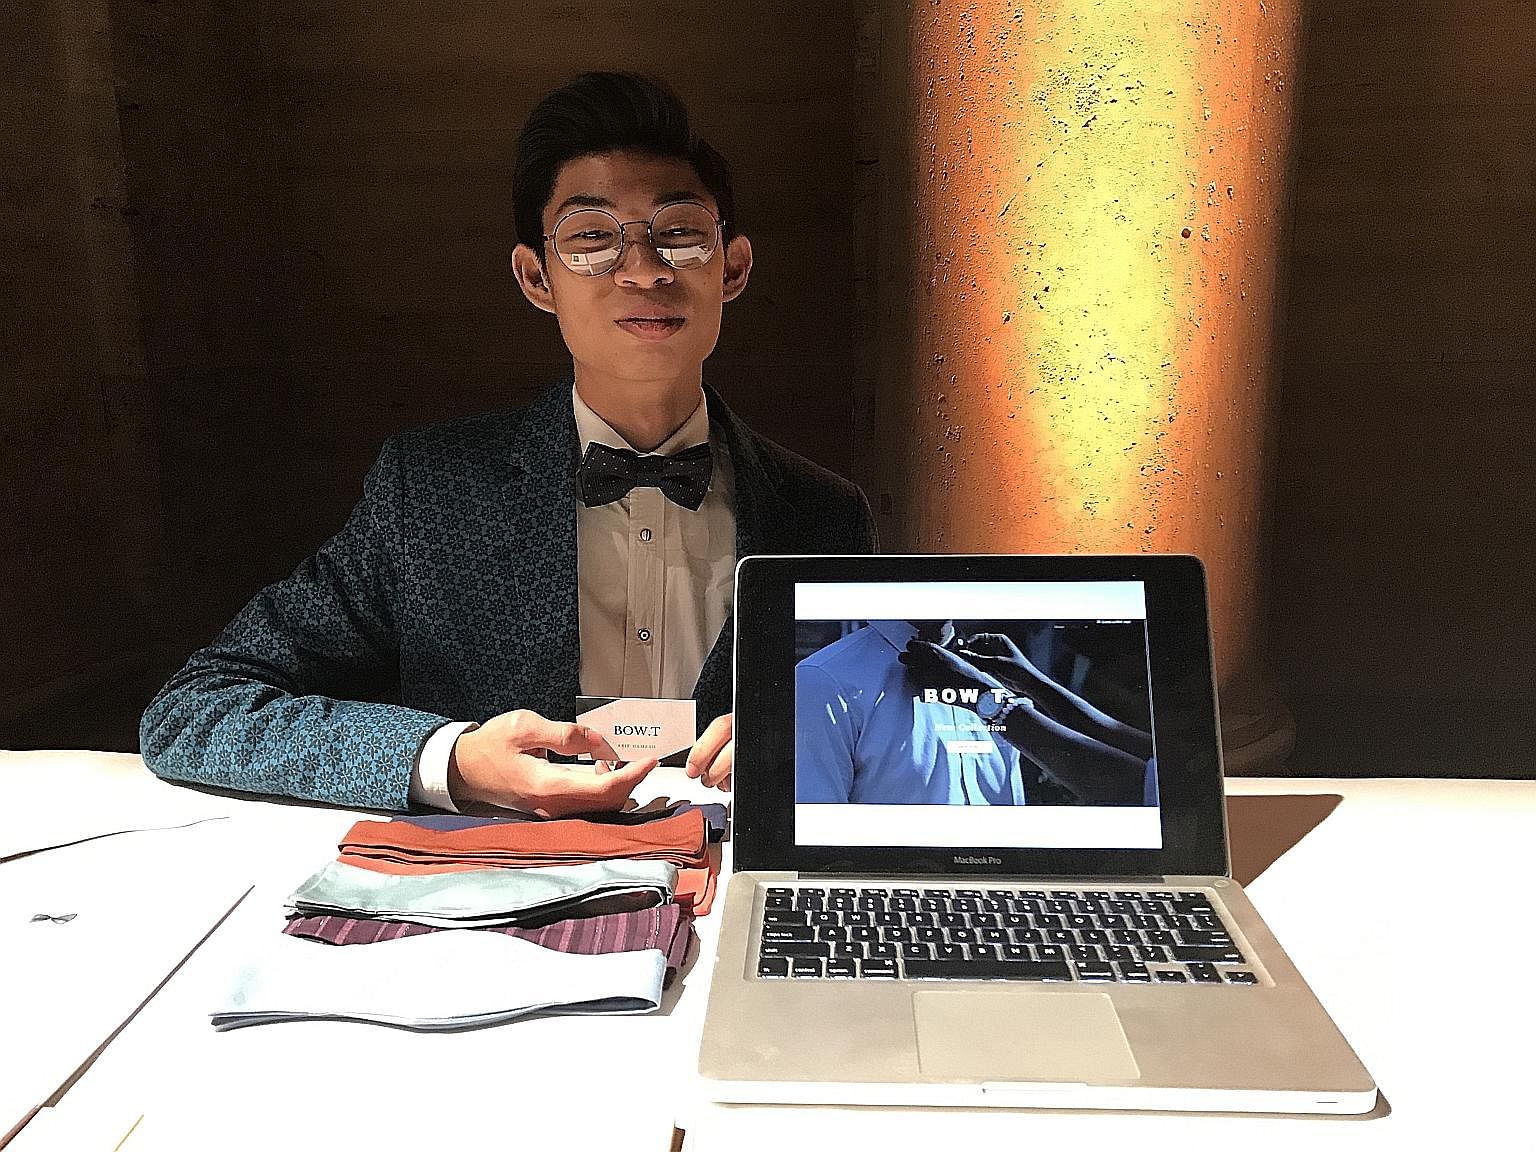 Arif Hamzah at his booth (above) in New York City, where he represented Singapore in an entrepreneurship challenge. His business idea, Bow T., is to make affordable bow ties from leftover fabric and sell them. His mentor, Mr Wong U-Yun (below, with A